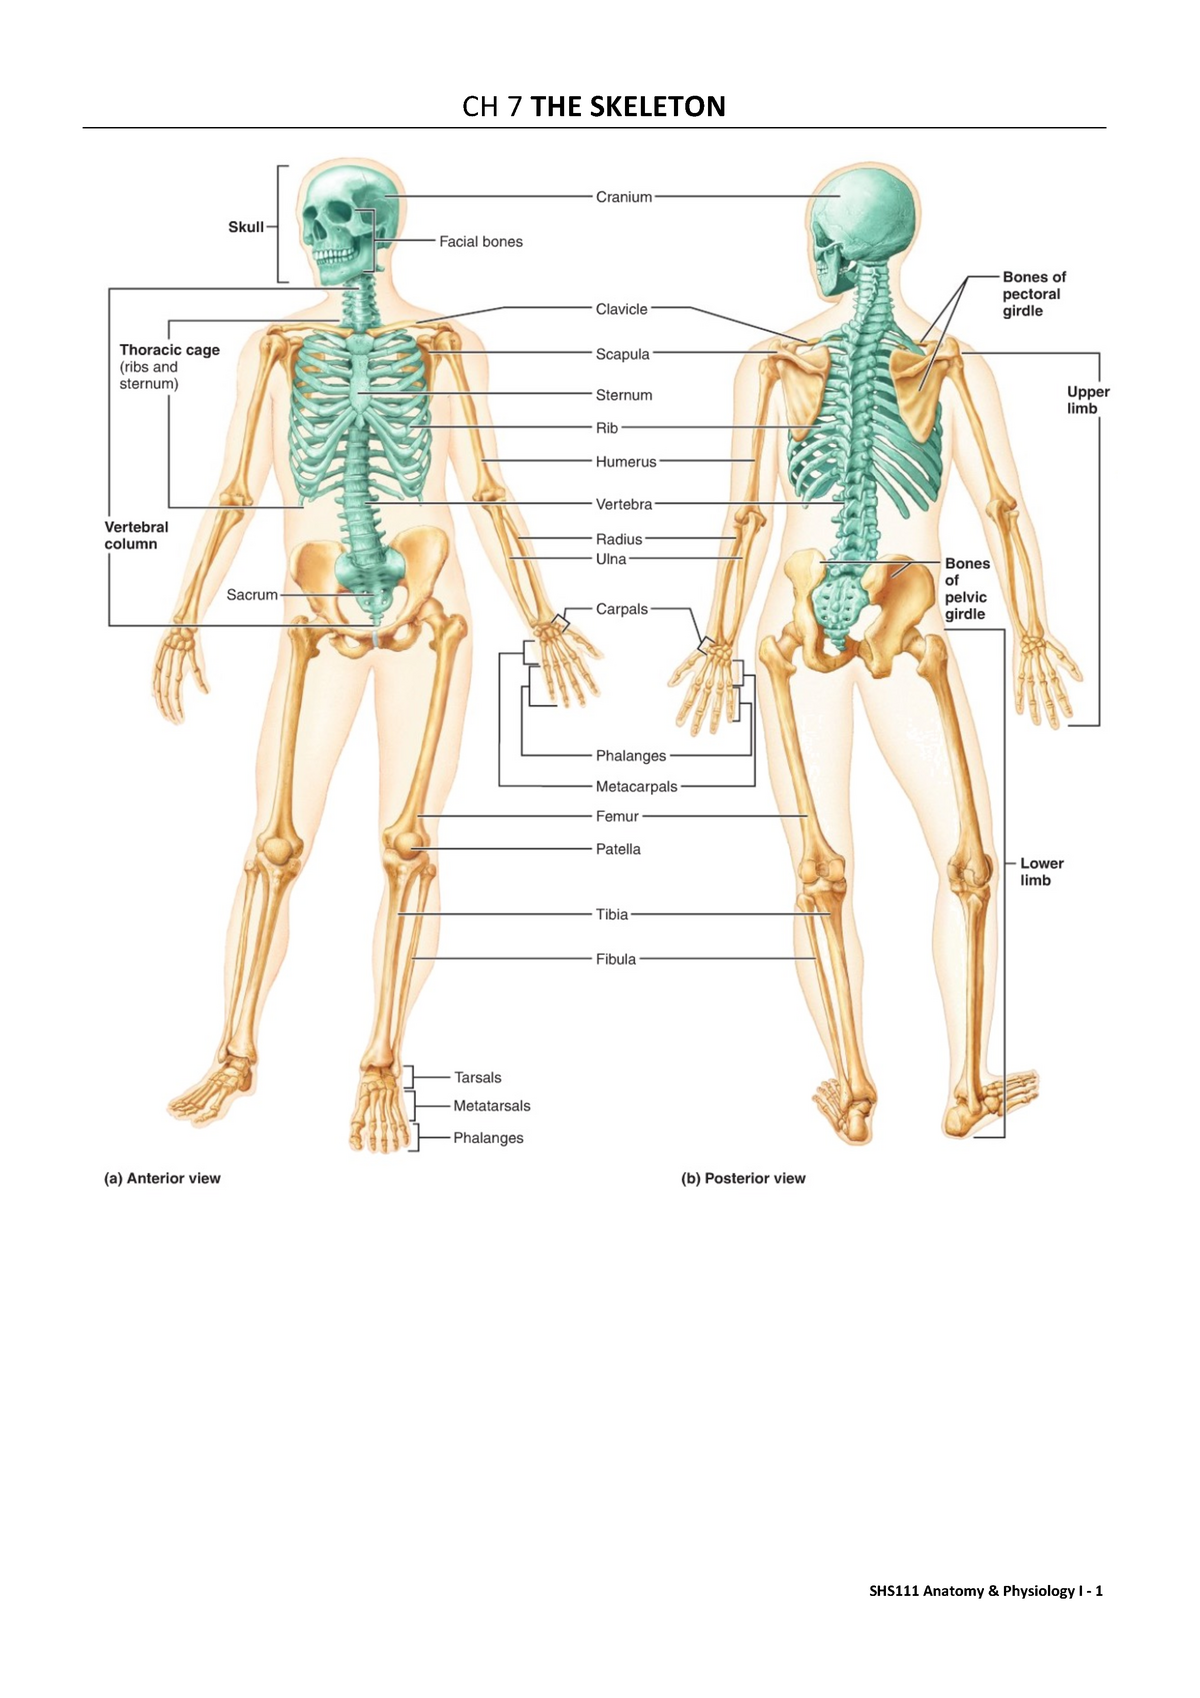 Summary The Skeleton Ch7 Shs111 Anatomy And Physiology I ­‐ 1 Ch 7